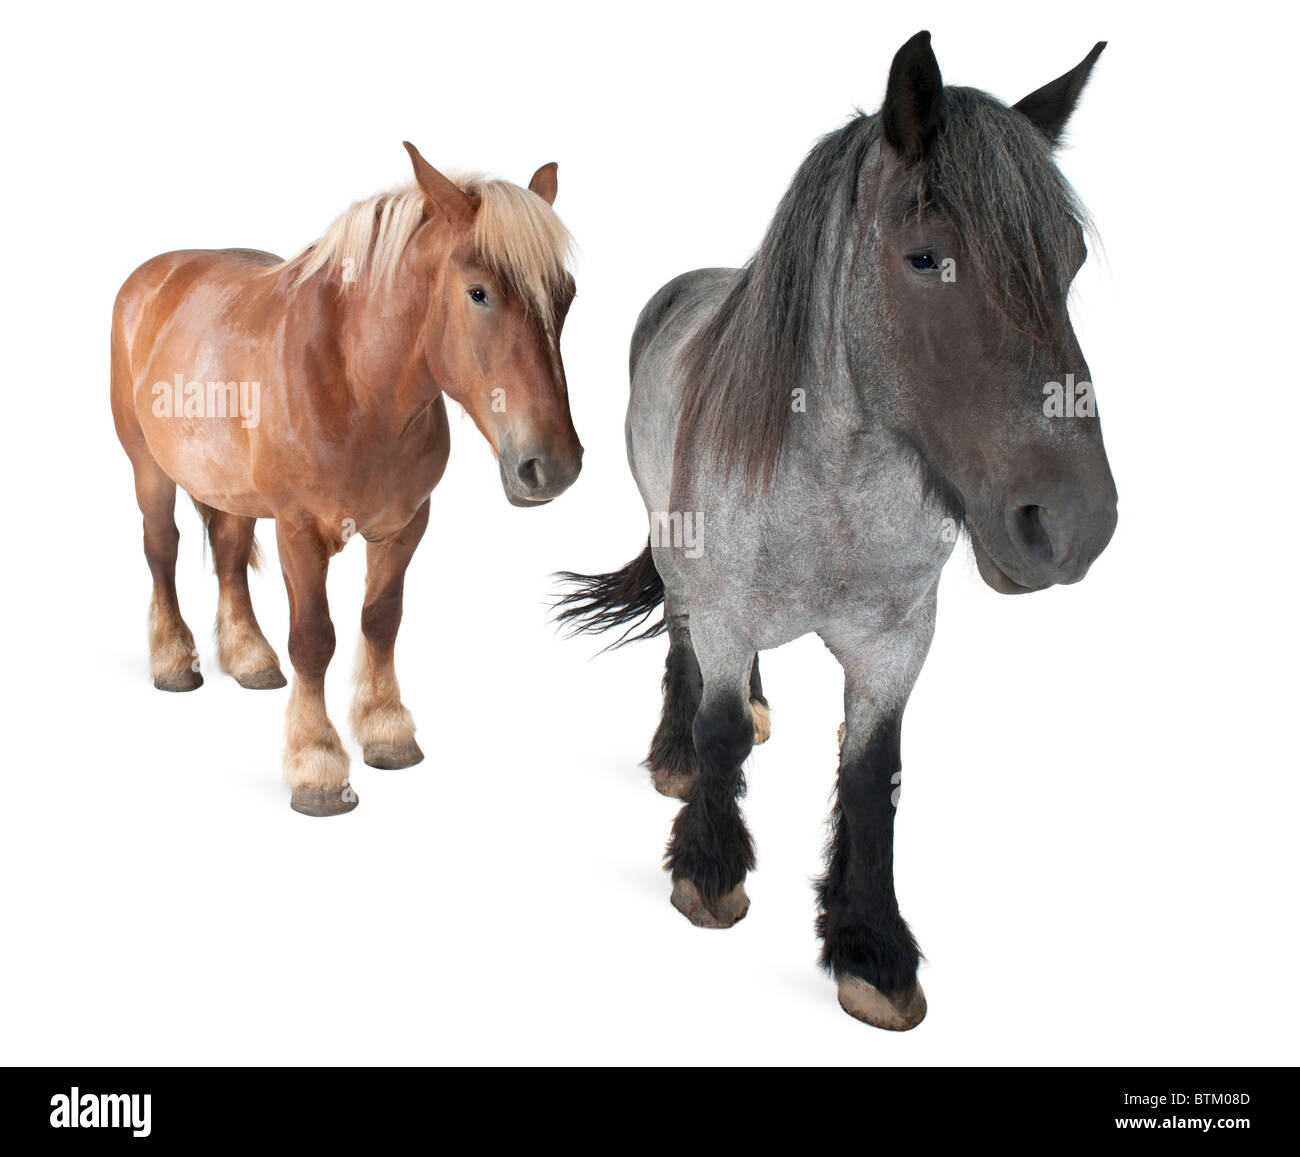 Belgian horses, Belgian Heavy Horse, Brabancon, a draft horse breed, standing in front of white background Stock Photo